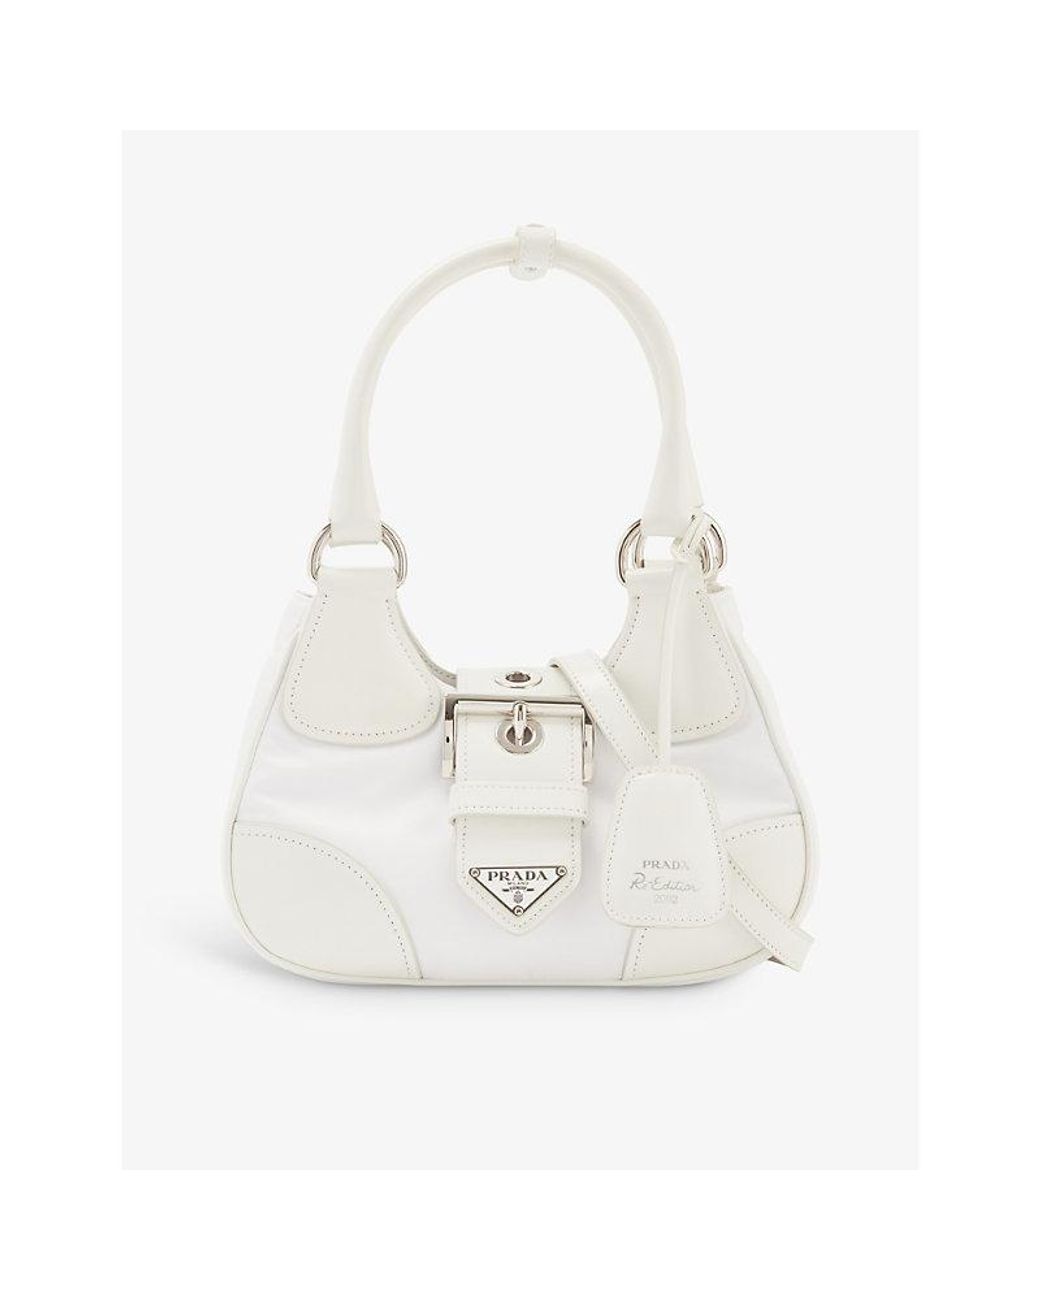 Moon Small Leather Shoulder Bag in White - Prada